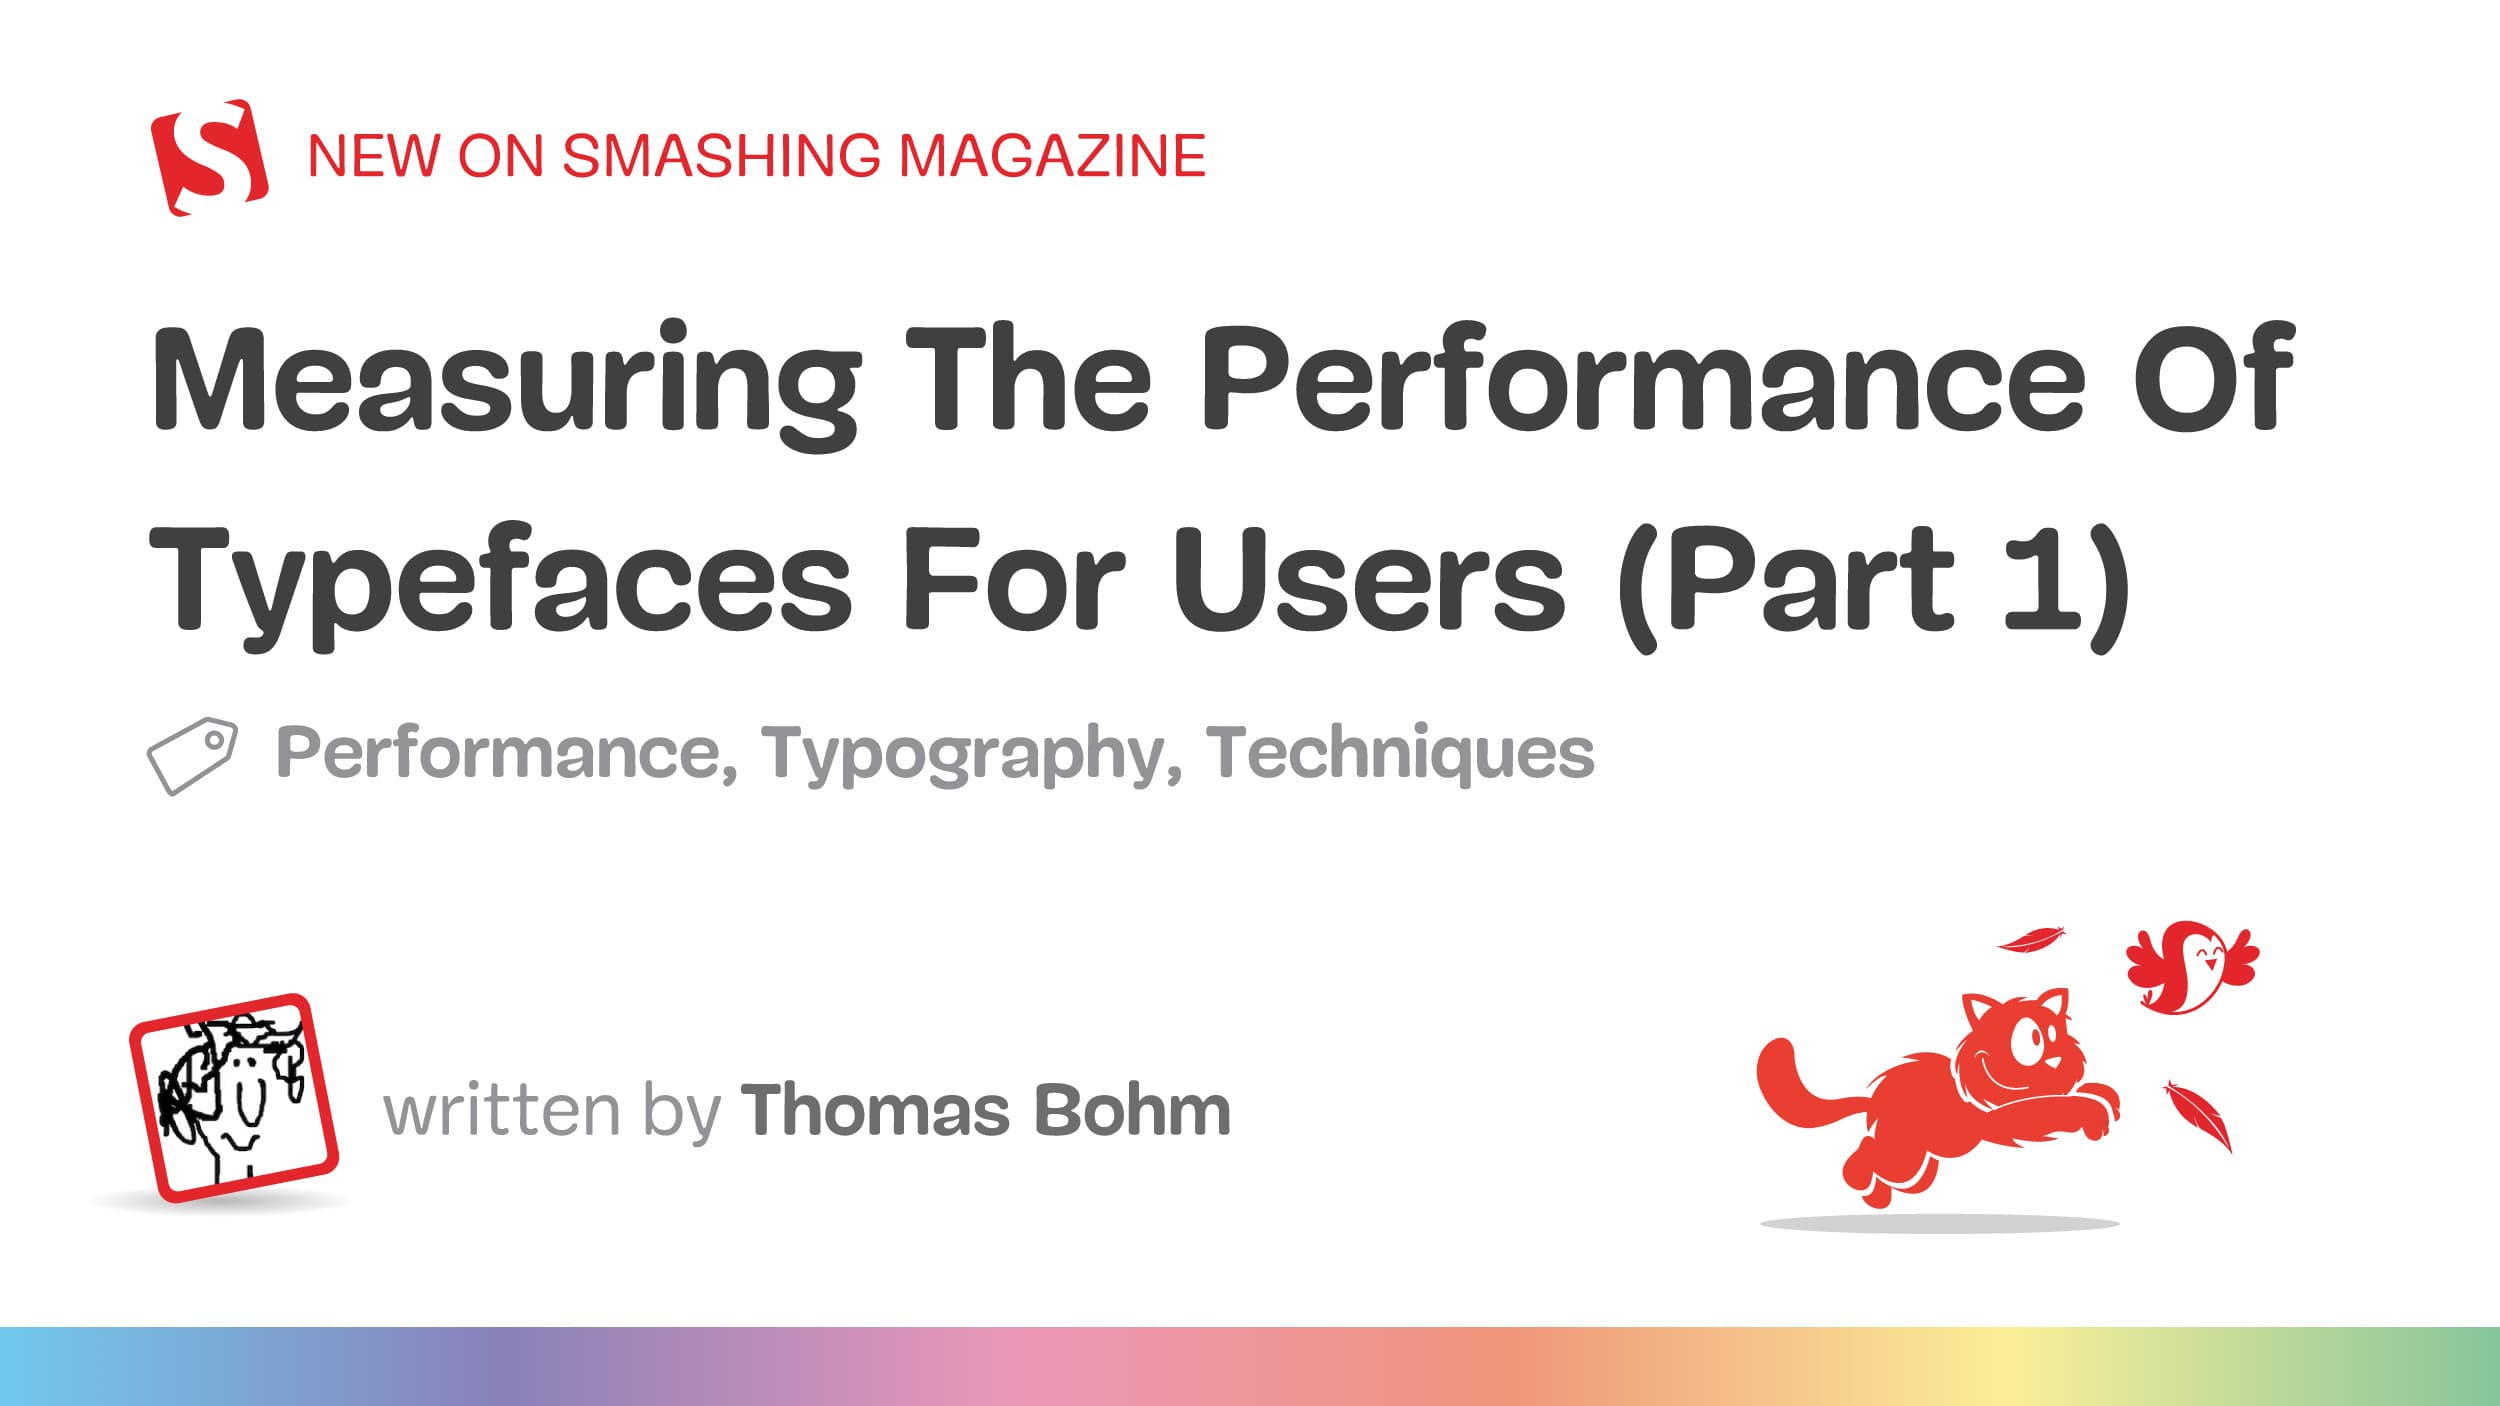 Measuring The Performance Of Typefaces For Users (Part 1)